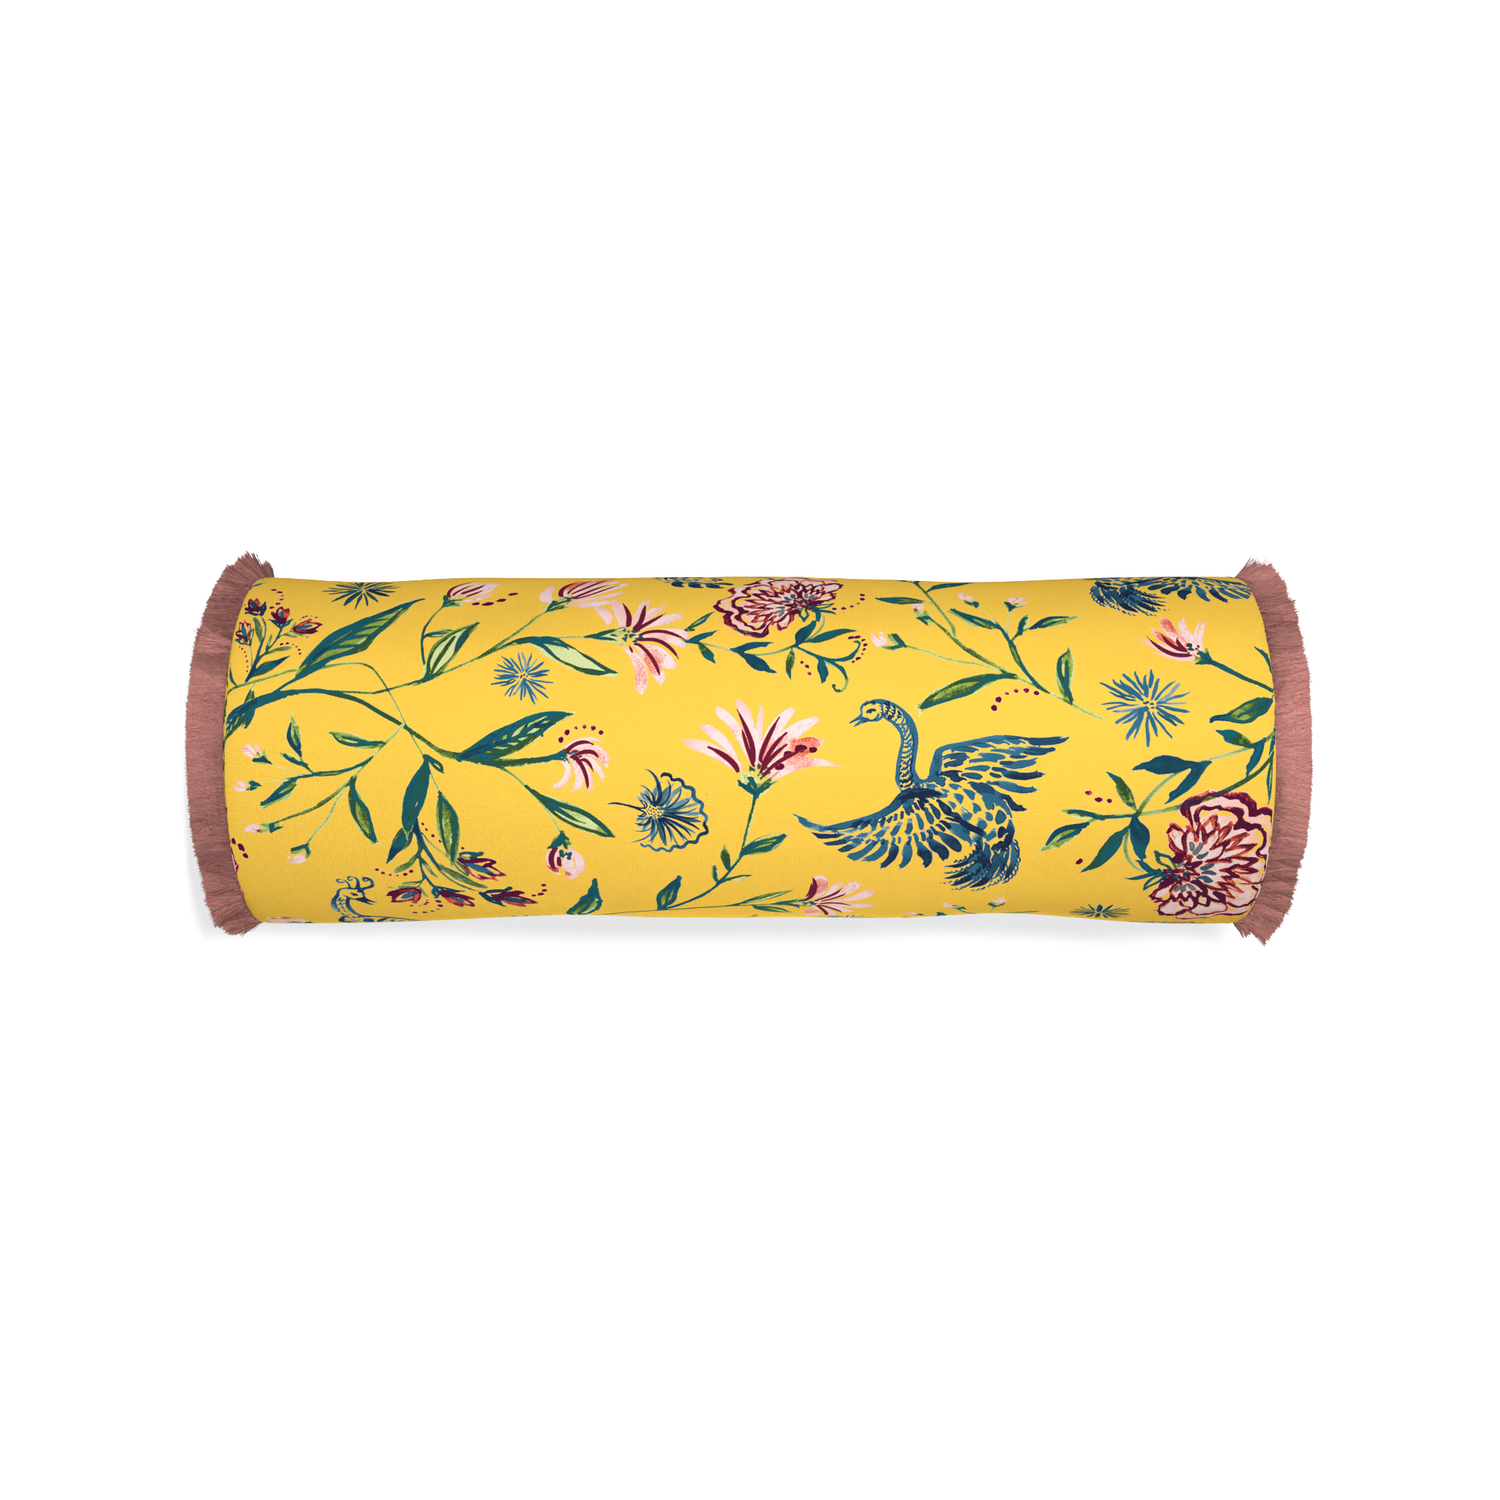 Bolster daphne canary custom yellow chinoiseriepillow with d fringe on white background